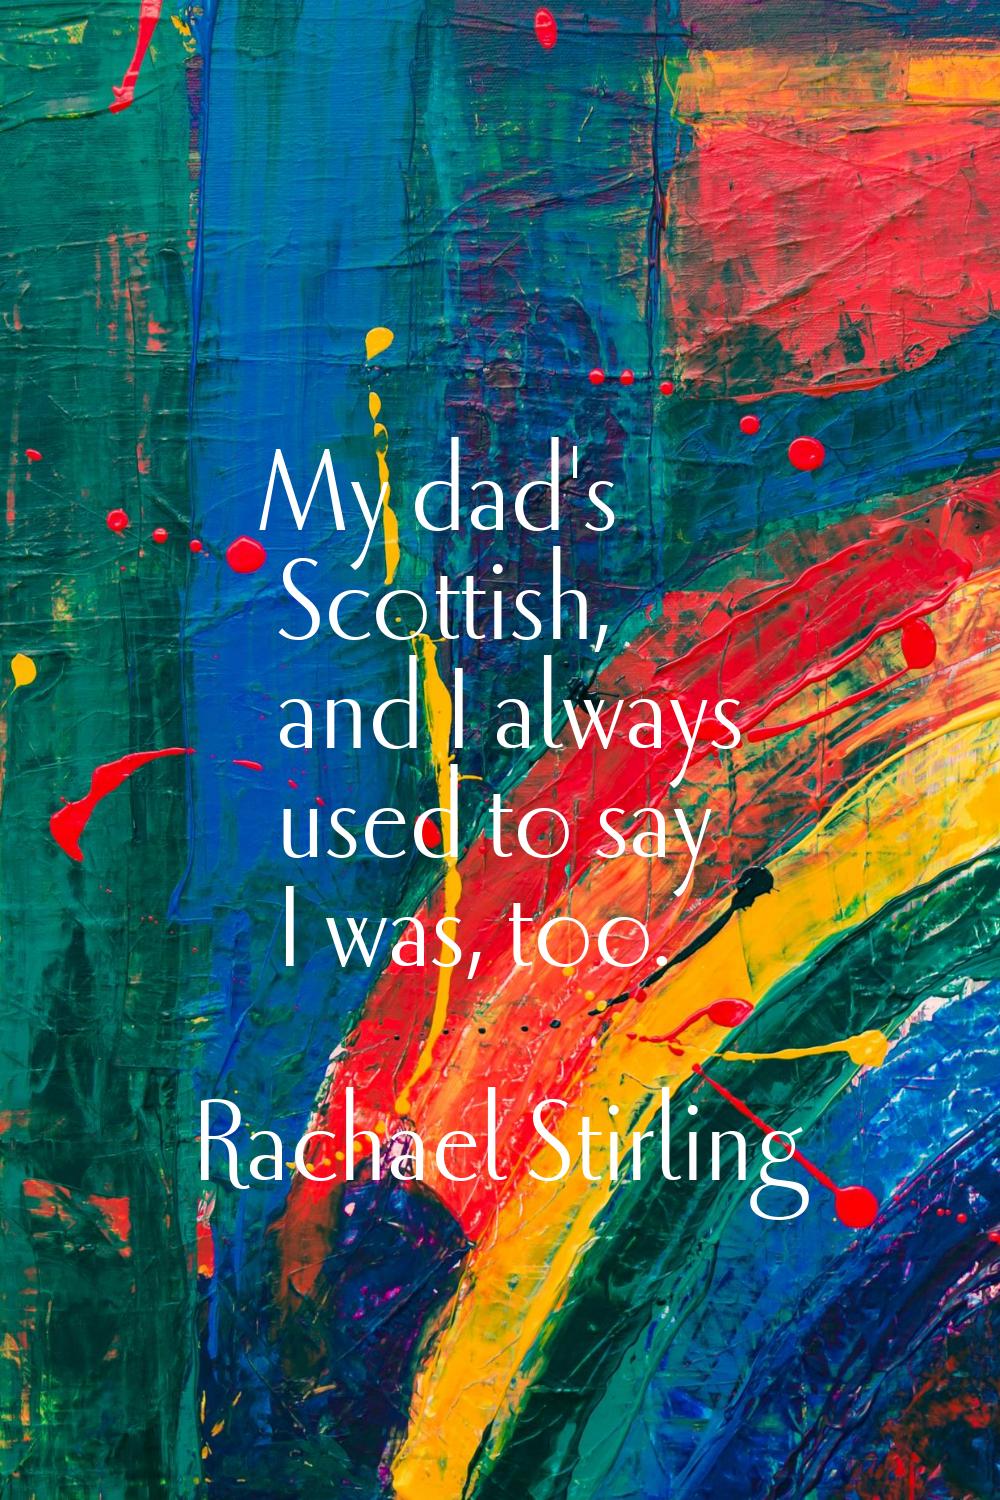 My dad's Scottish, and I always used to say I was, too.